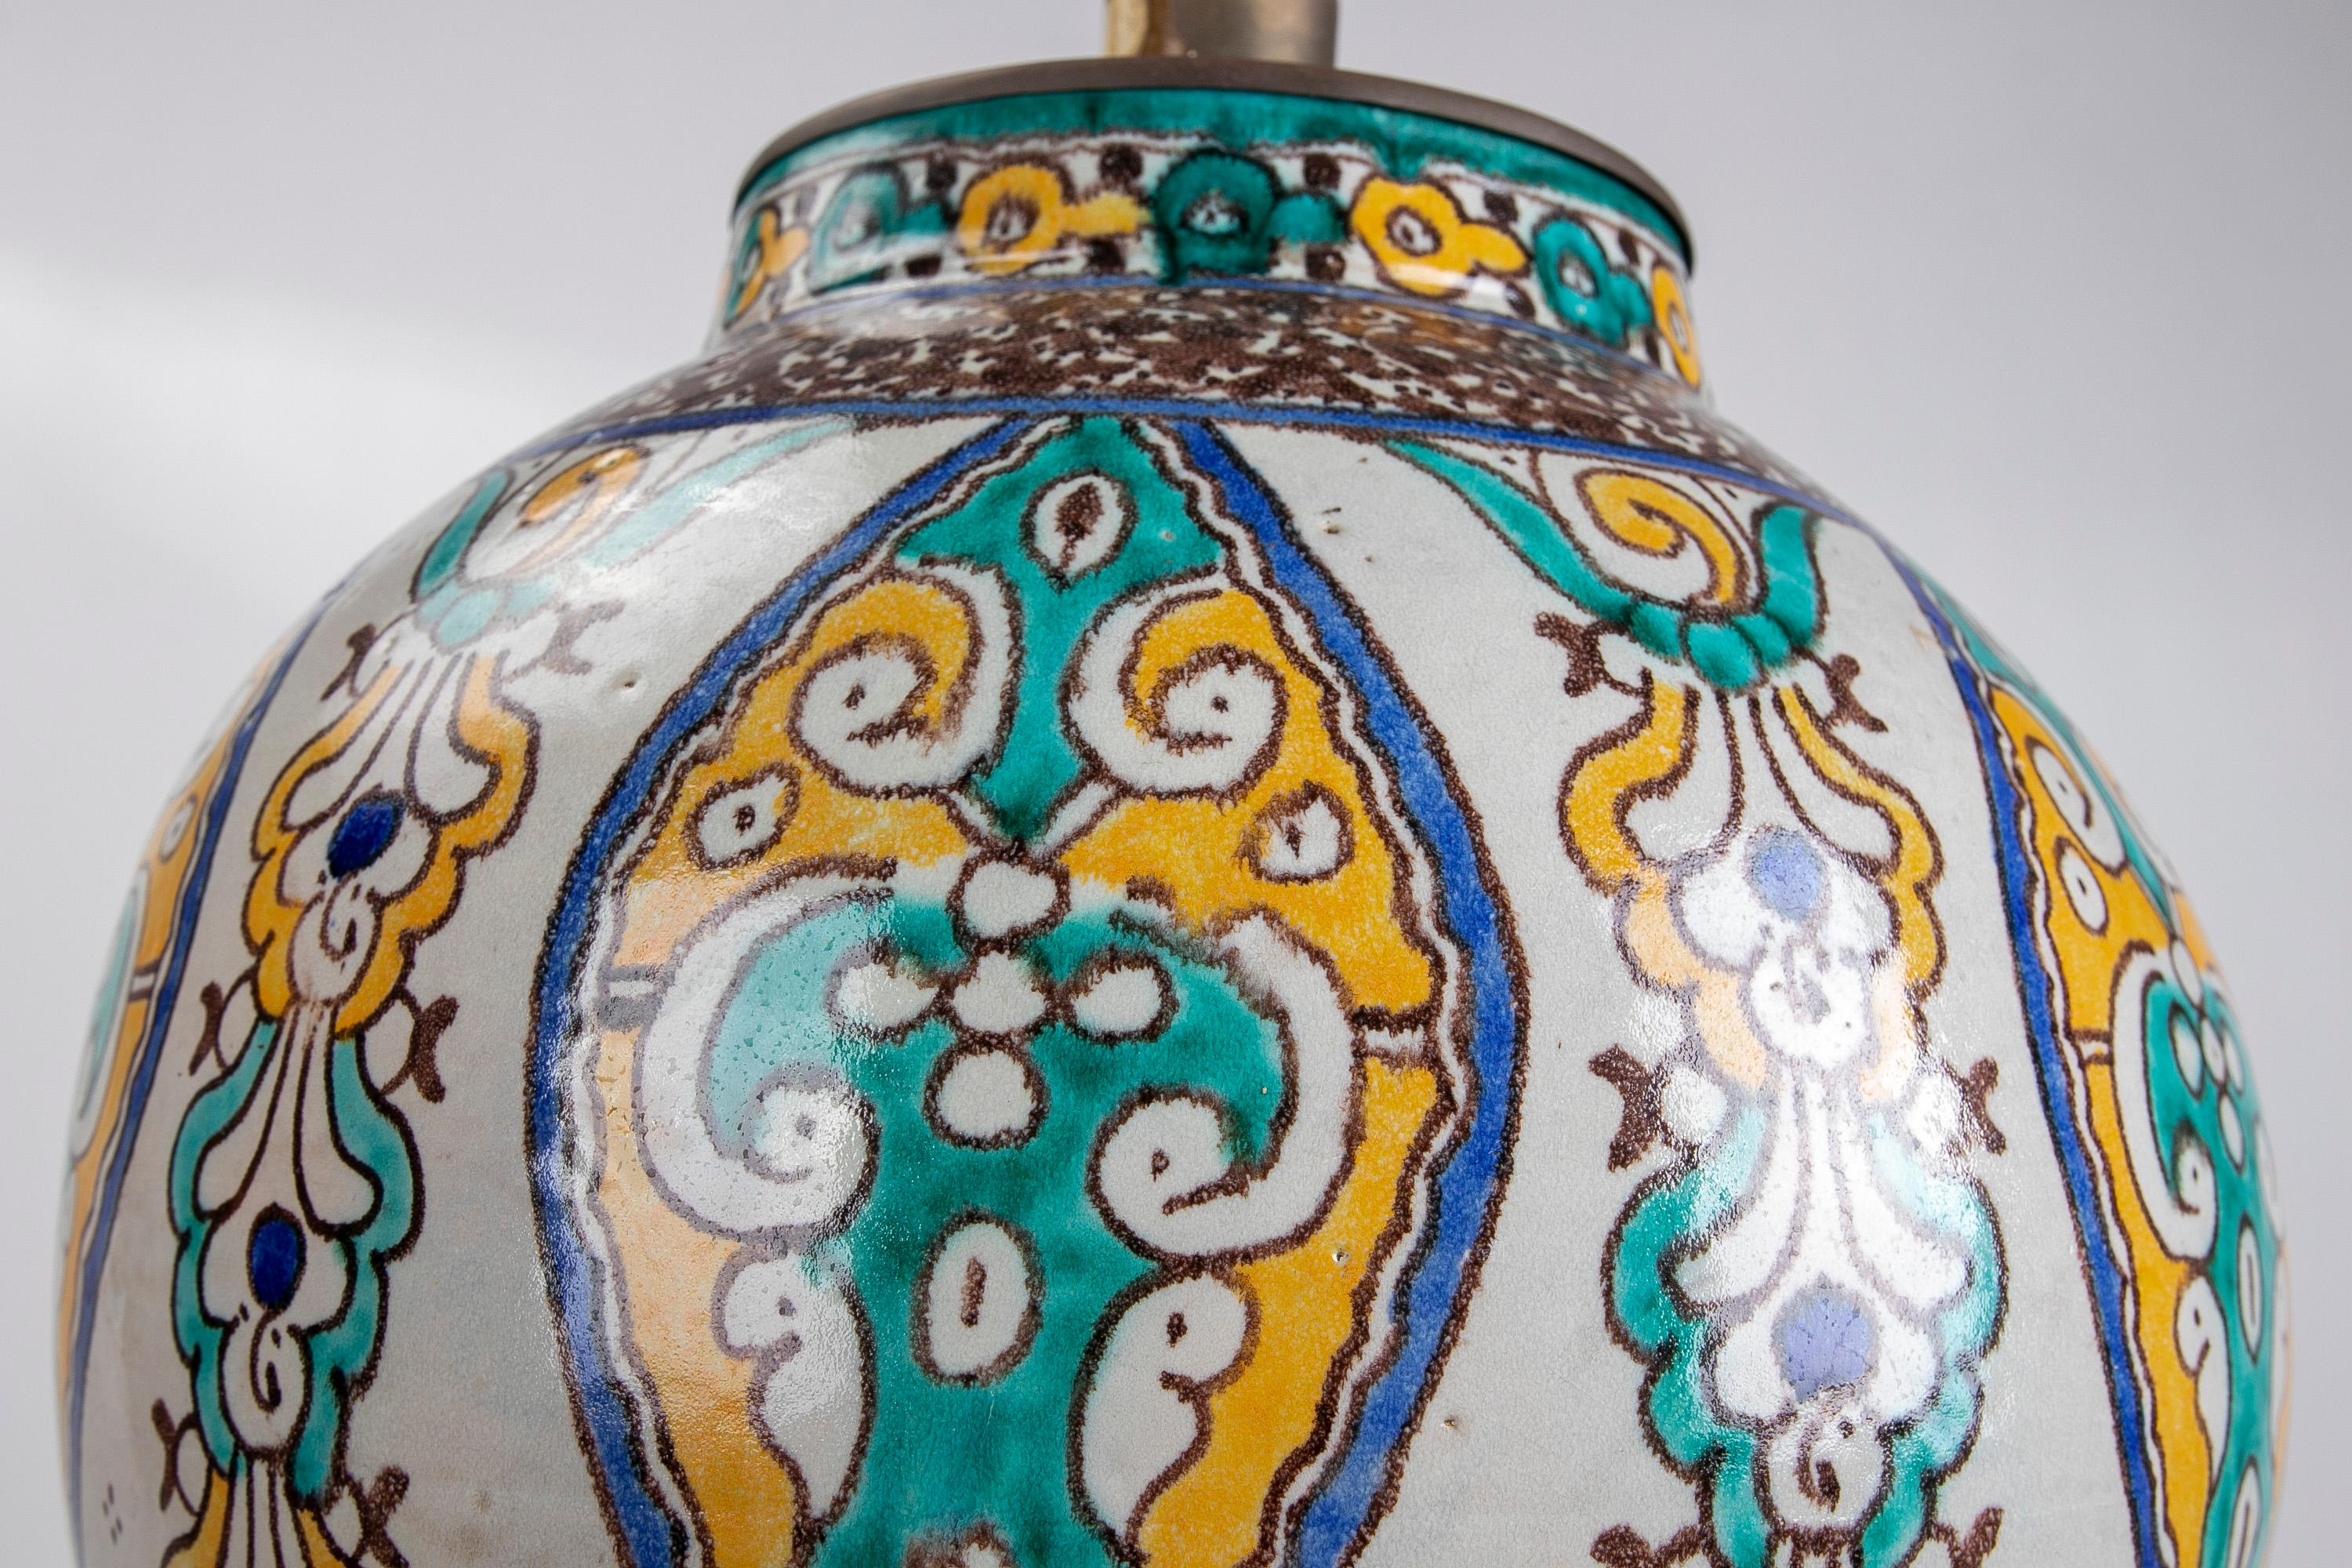 Hand-Painted ceramic table lamp with metal decorations.